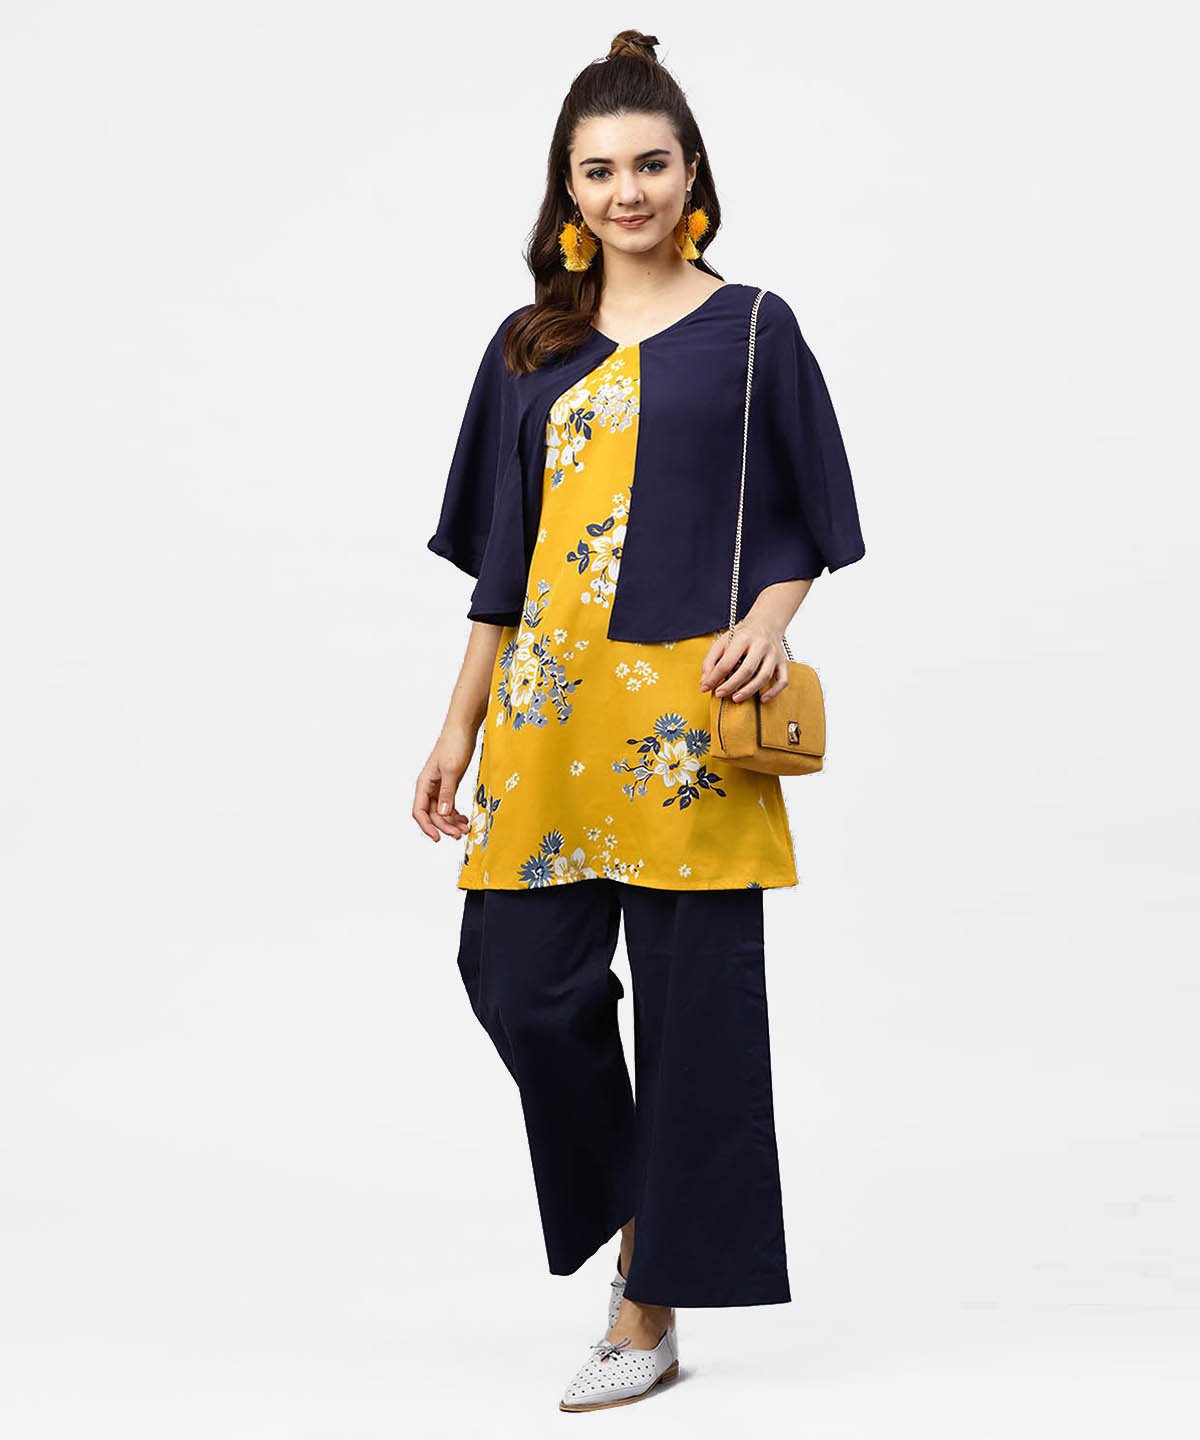 Women's Yellow Printed Tunic With Attached Cape Sleeves And V-Neck - Nayo Clothing